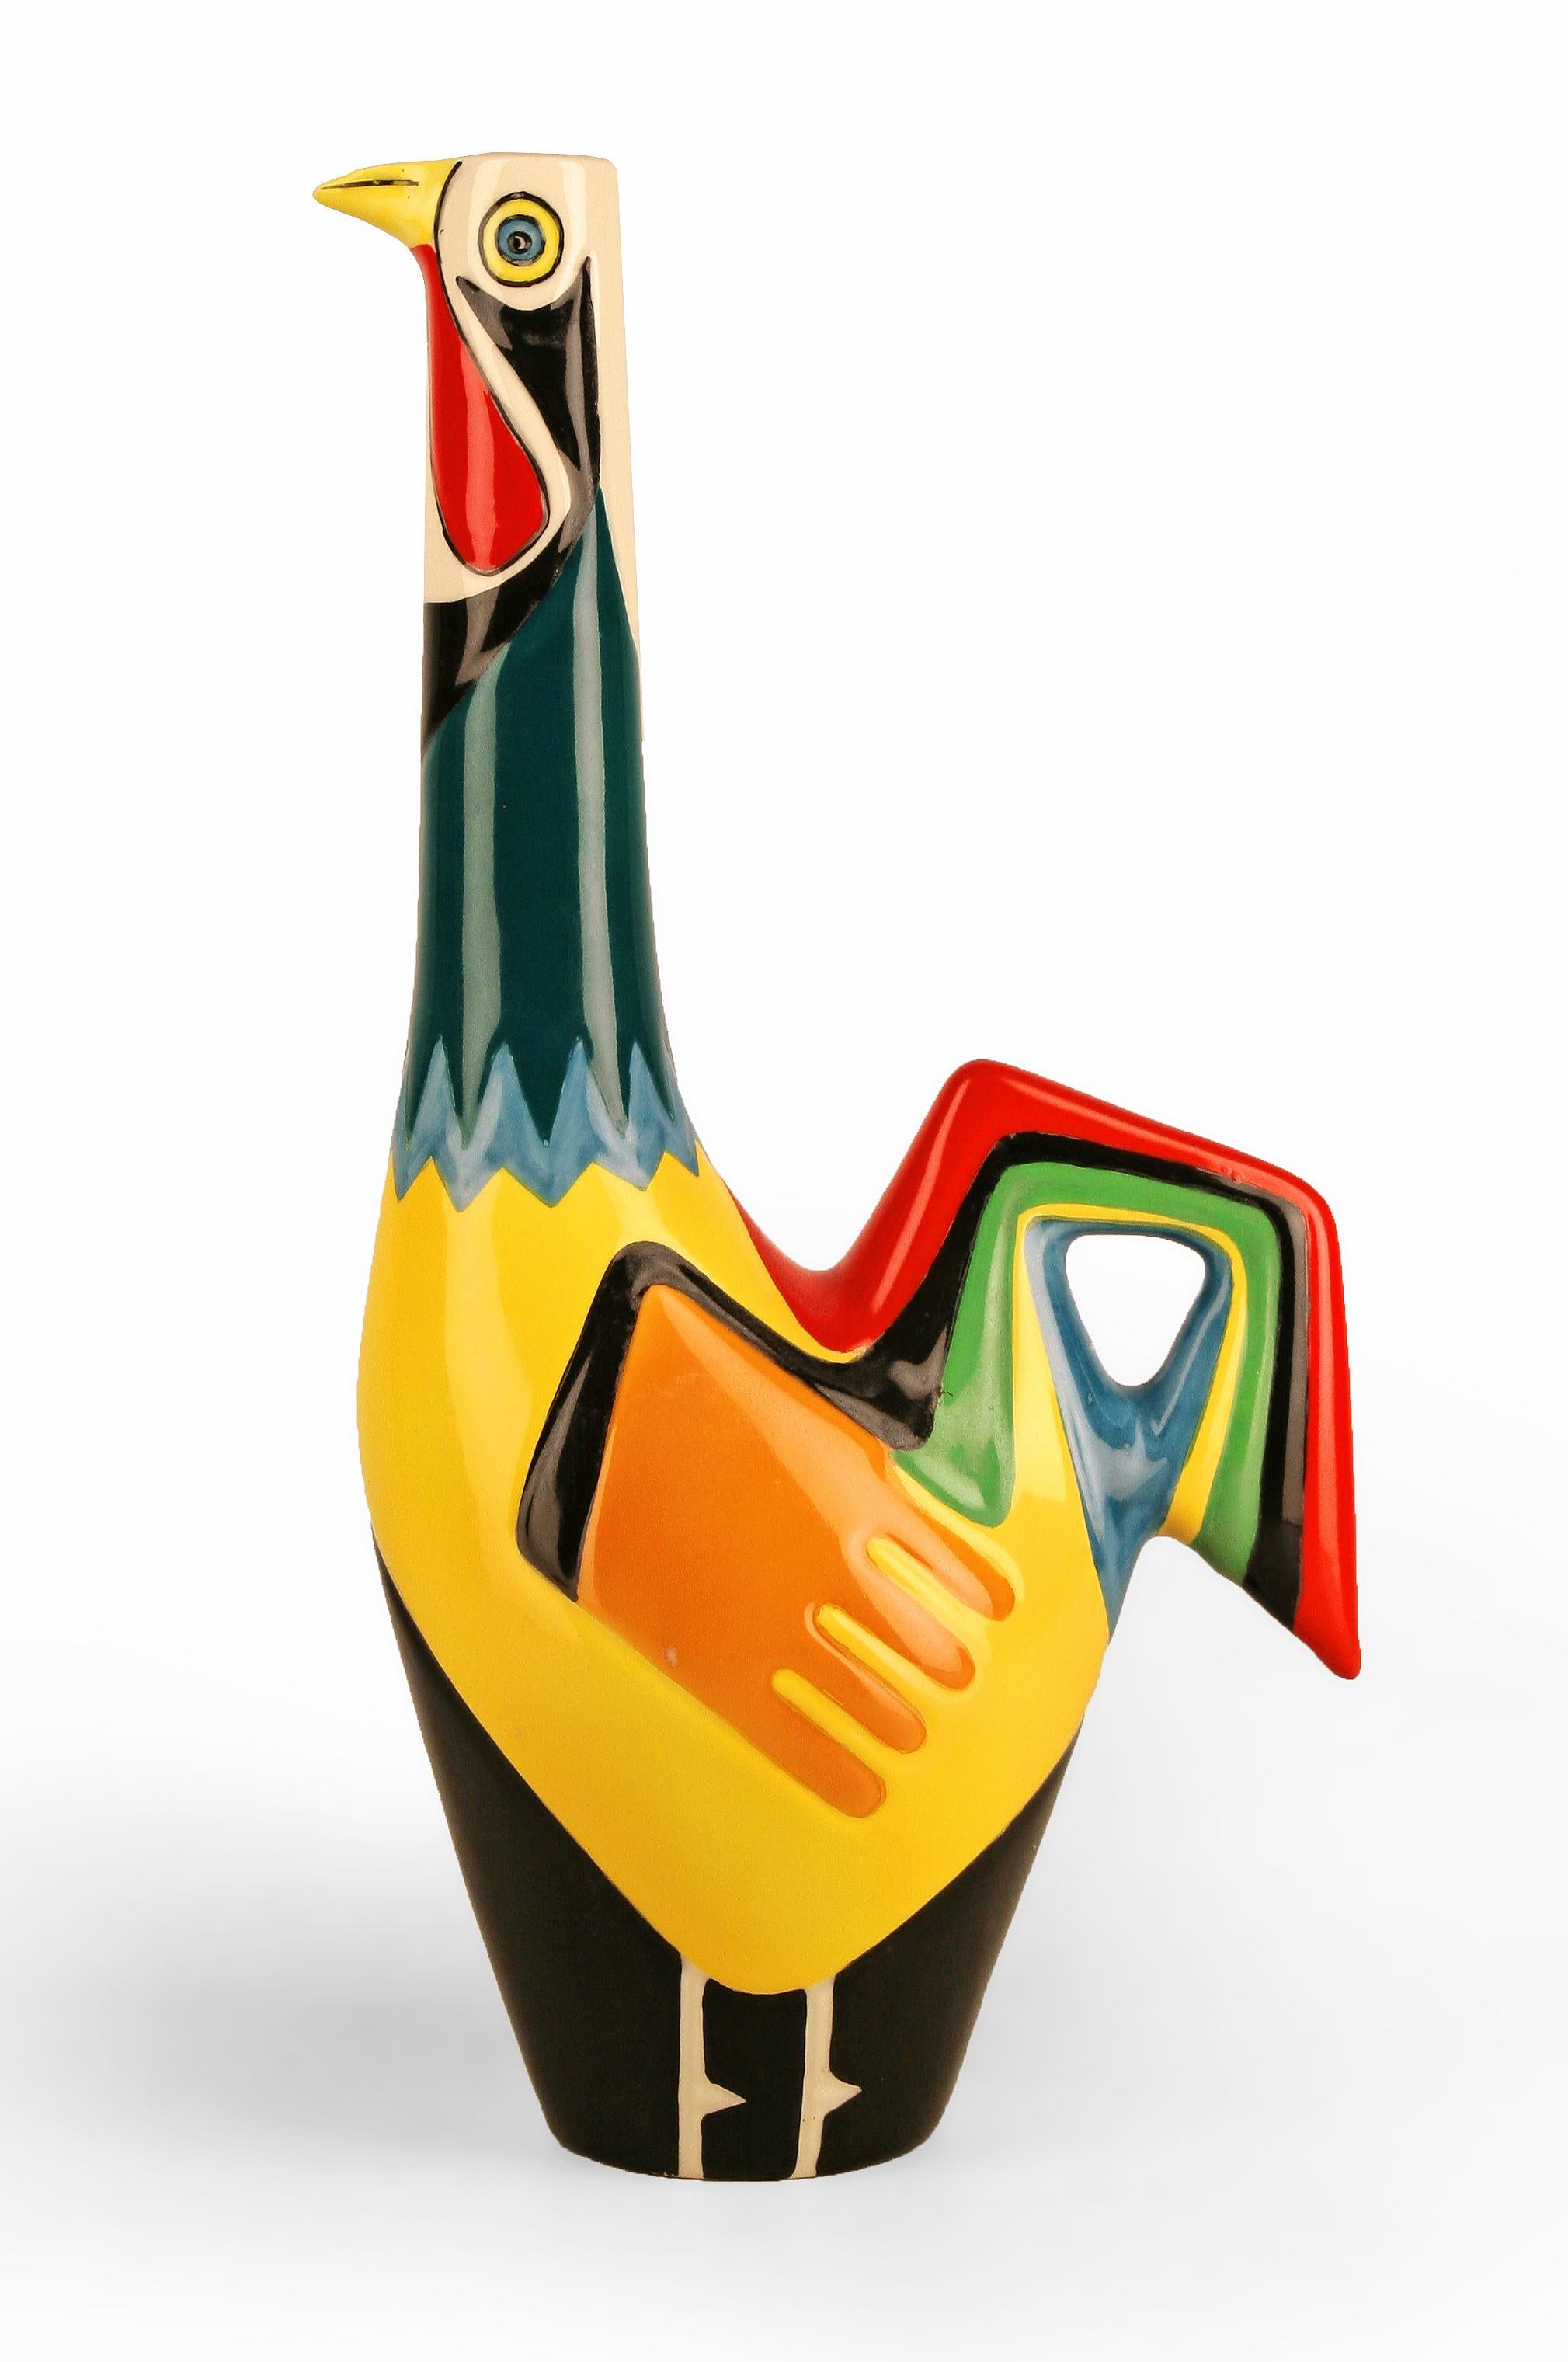 Mid-20th century portuguese colorful enameled hand-painted ceramic rooster wine decanter/pitcher by Real Vinícola

By: Real Vinícola, 
Material: ceramic, enamel, paint
Technique: enameled, glazed, hand-painted, molded, painted, polished,